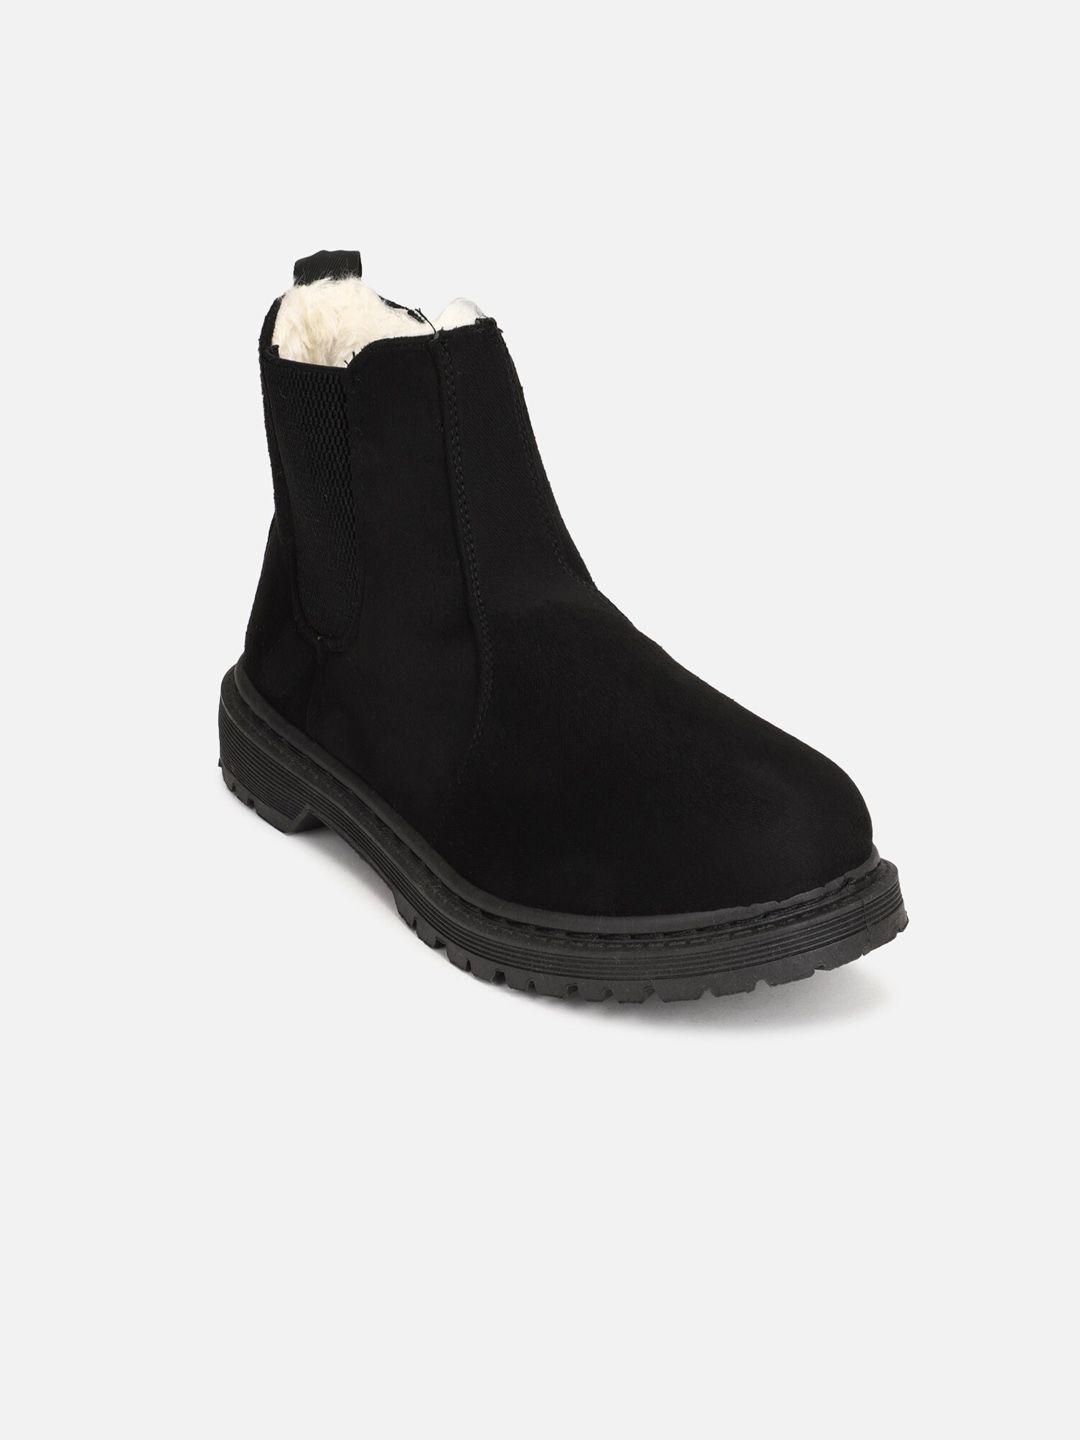 forever-21-women-black-solid-boots